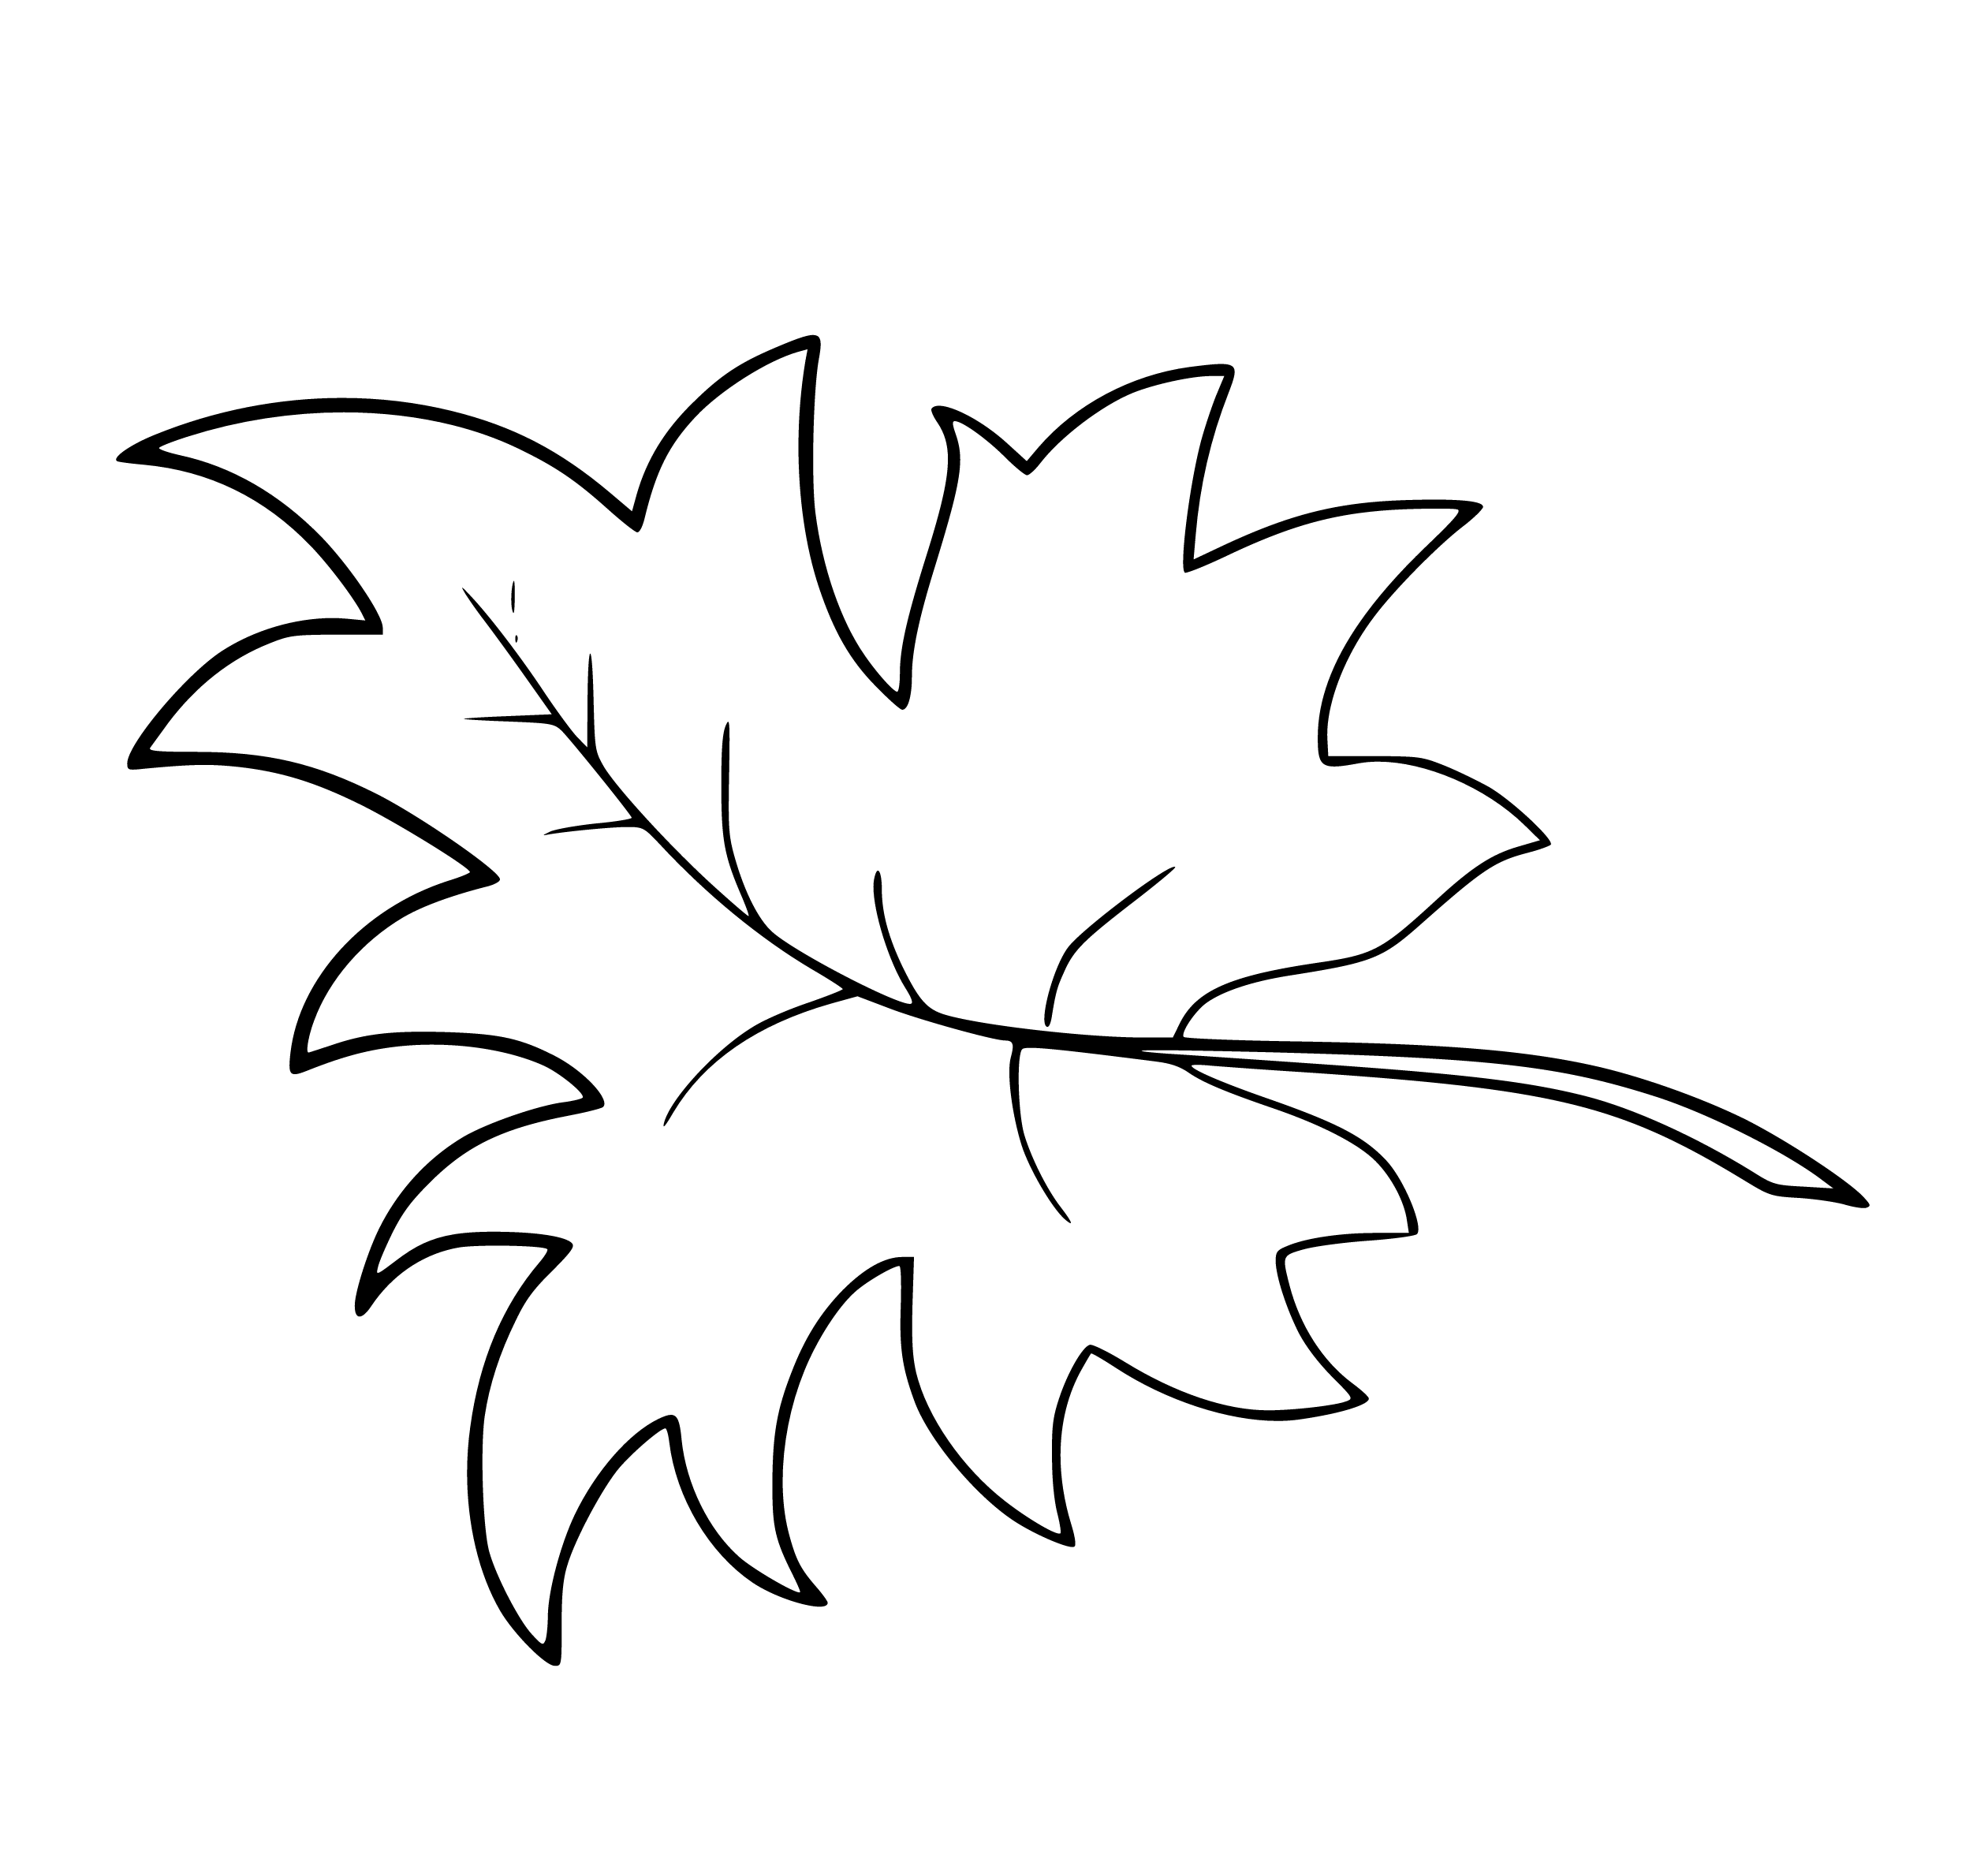 Maple's Leaf Coloring Page Printable for Kids, Free, Simple and Easy, as PDF